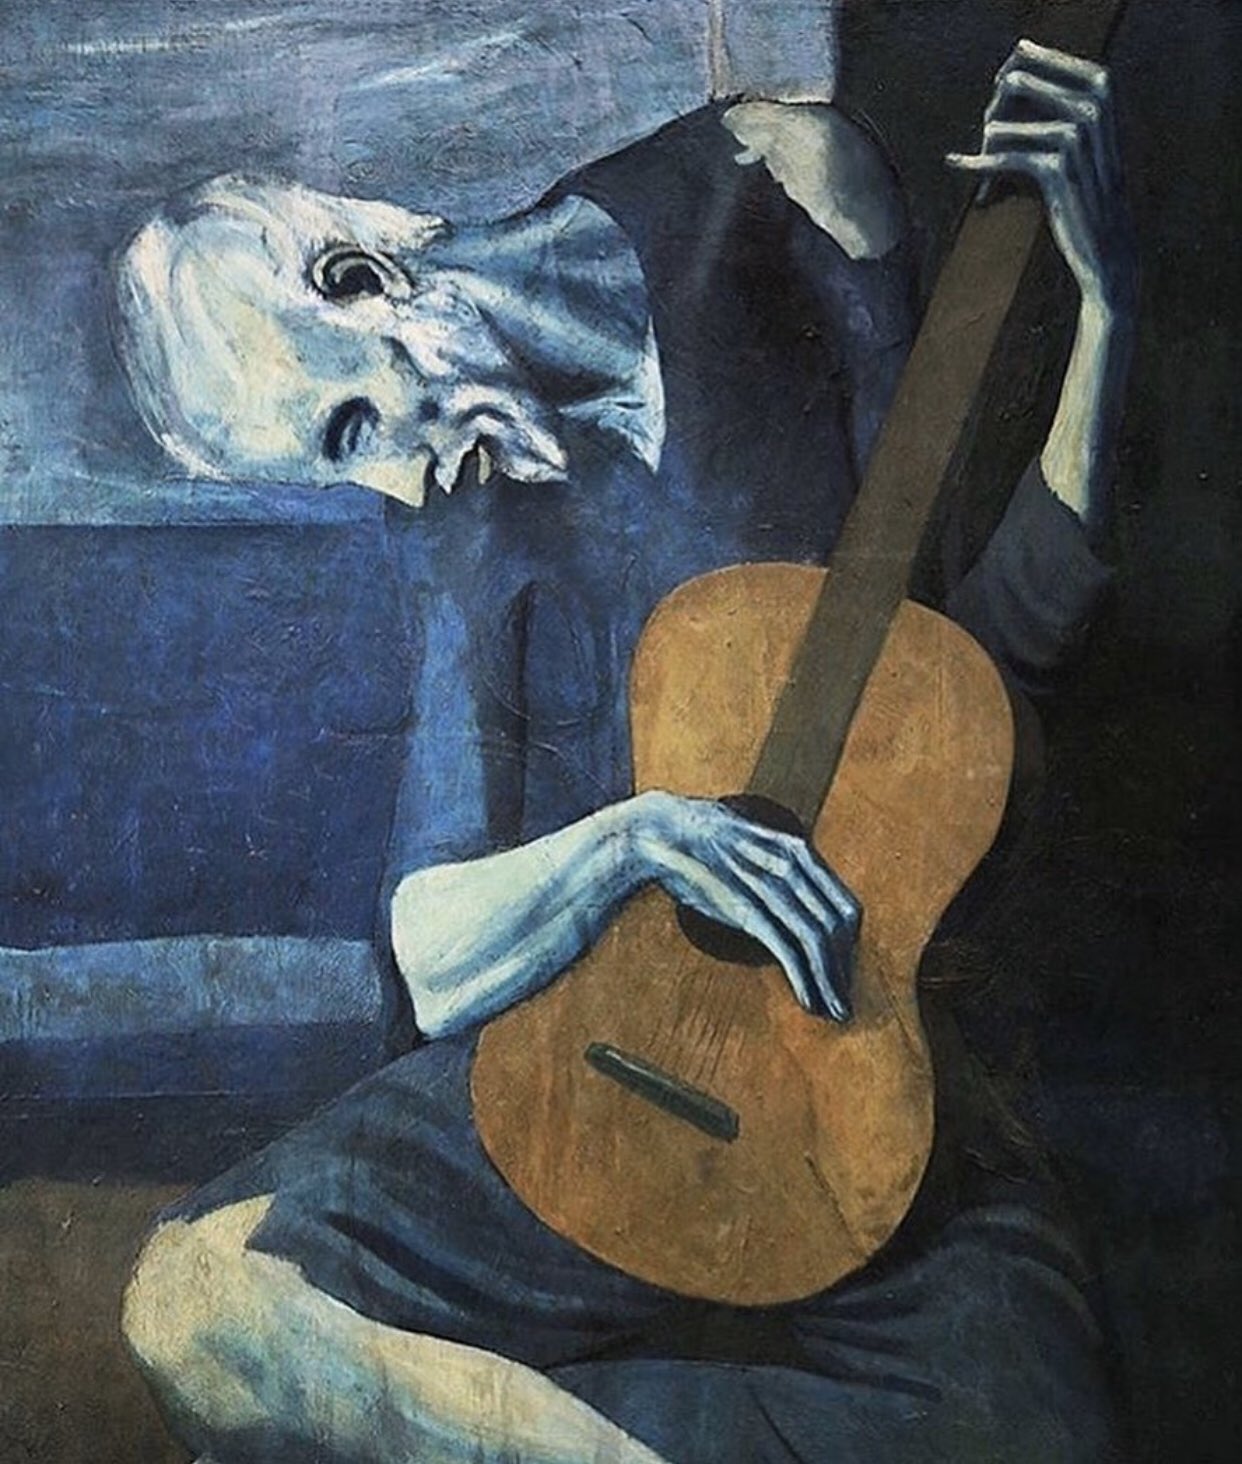 PicPublic on Twitter: "The Old Guitarist - 1904 Pablo Picasso https://t.co/oyLWkQxlpq" / Twitter